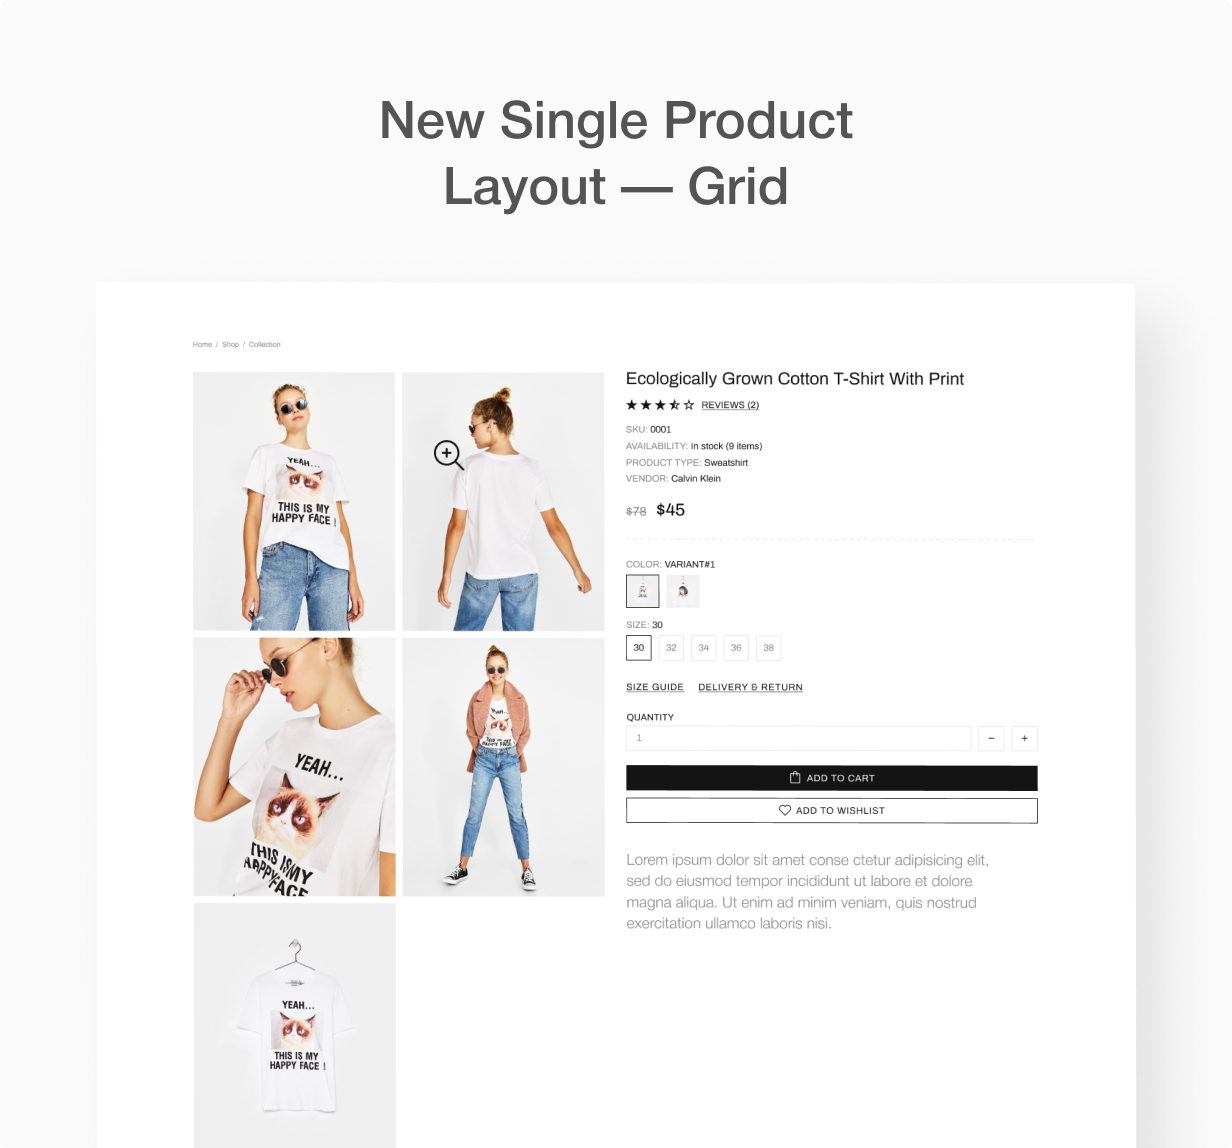 Product info page, grid layout.